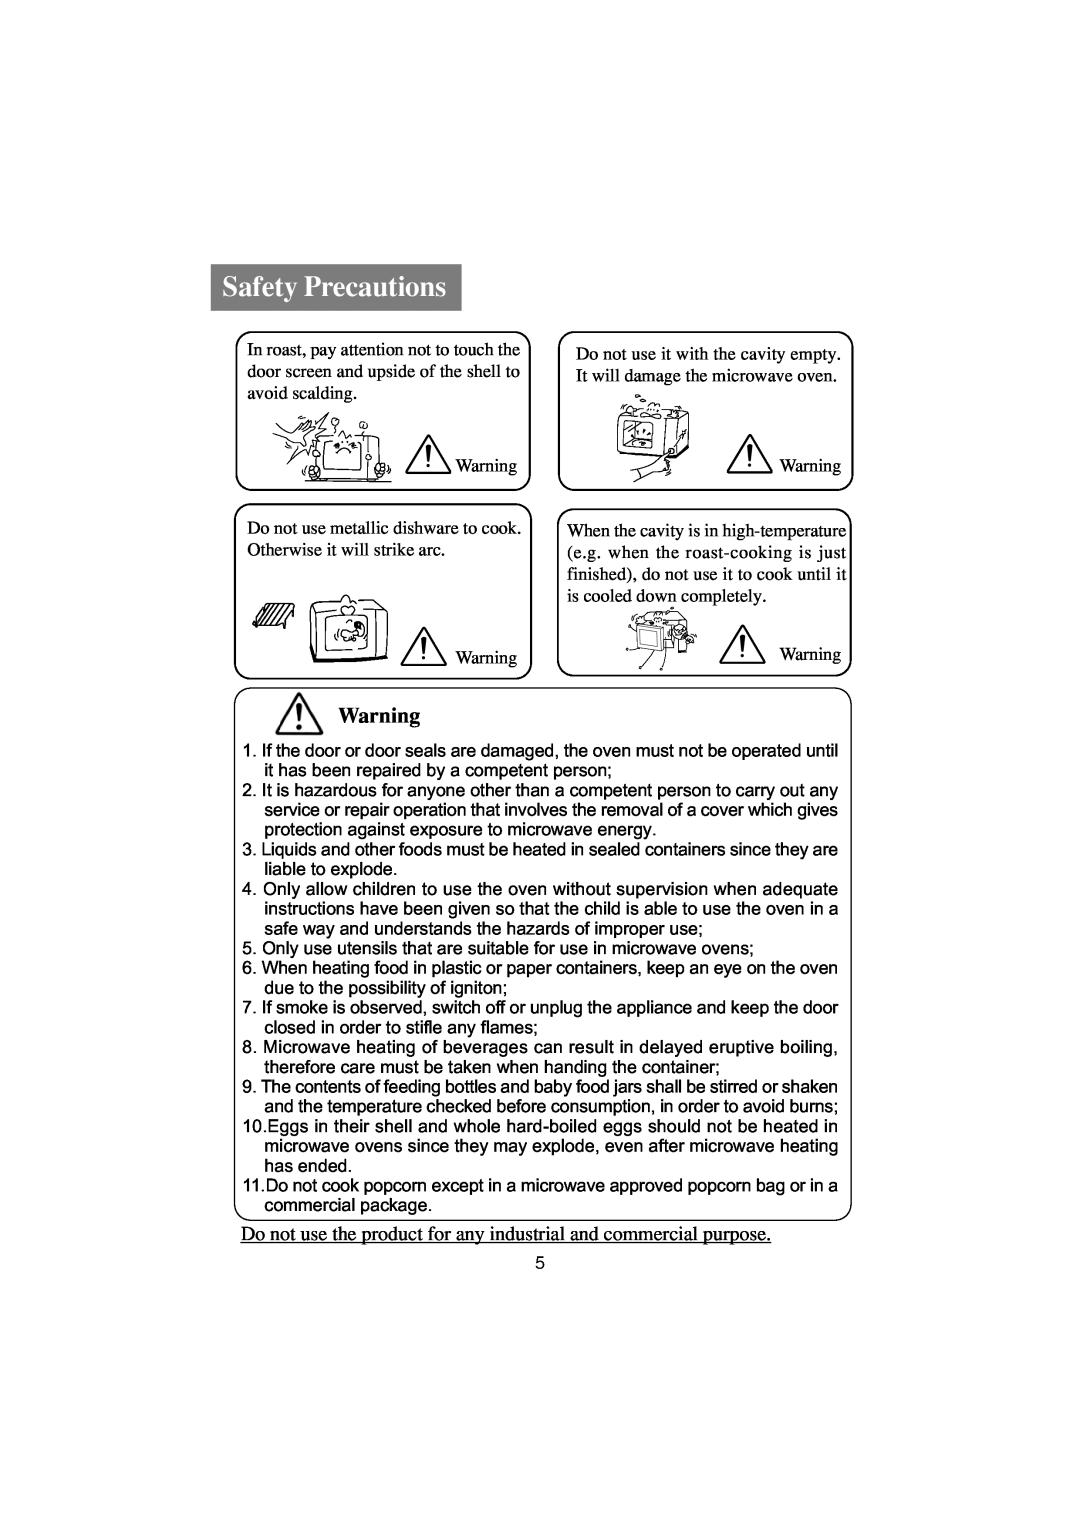 Haier HR-7857A user manual Safety Precautions, Do not use the product for any industrial and commercial purpose 